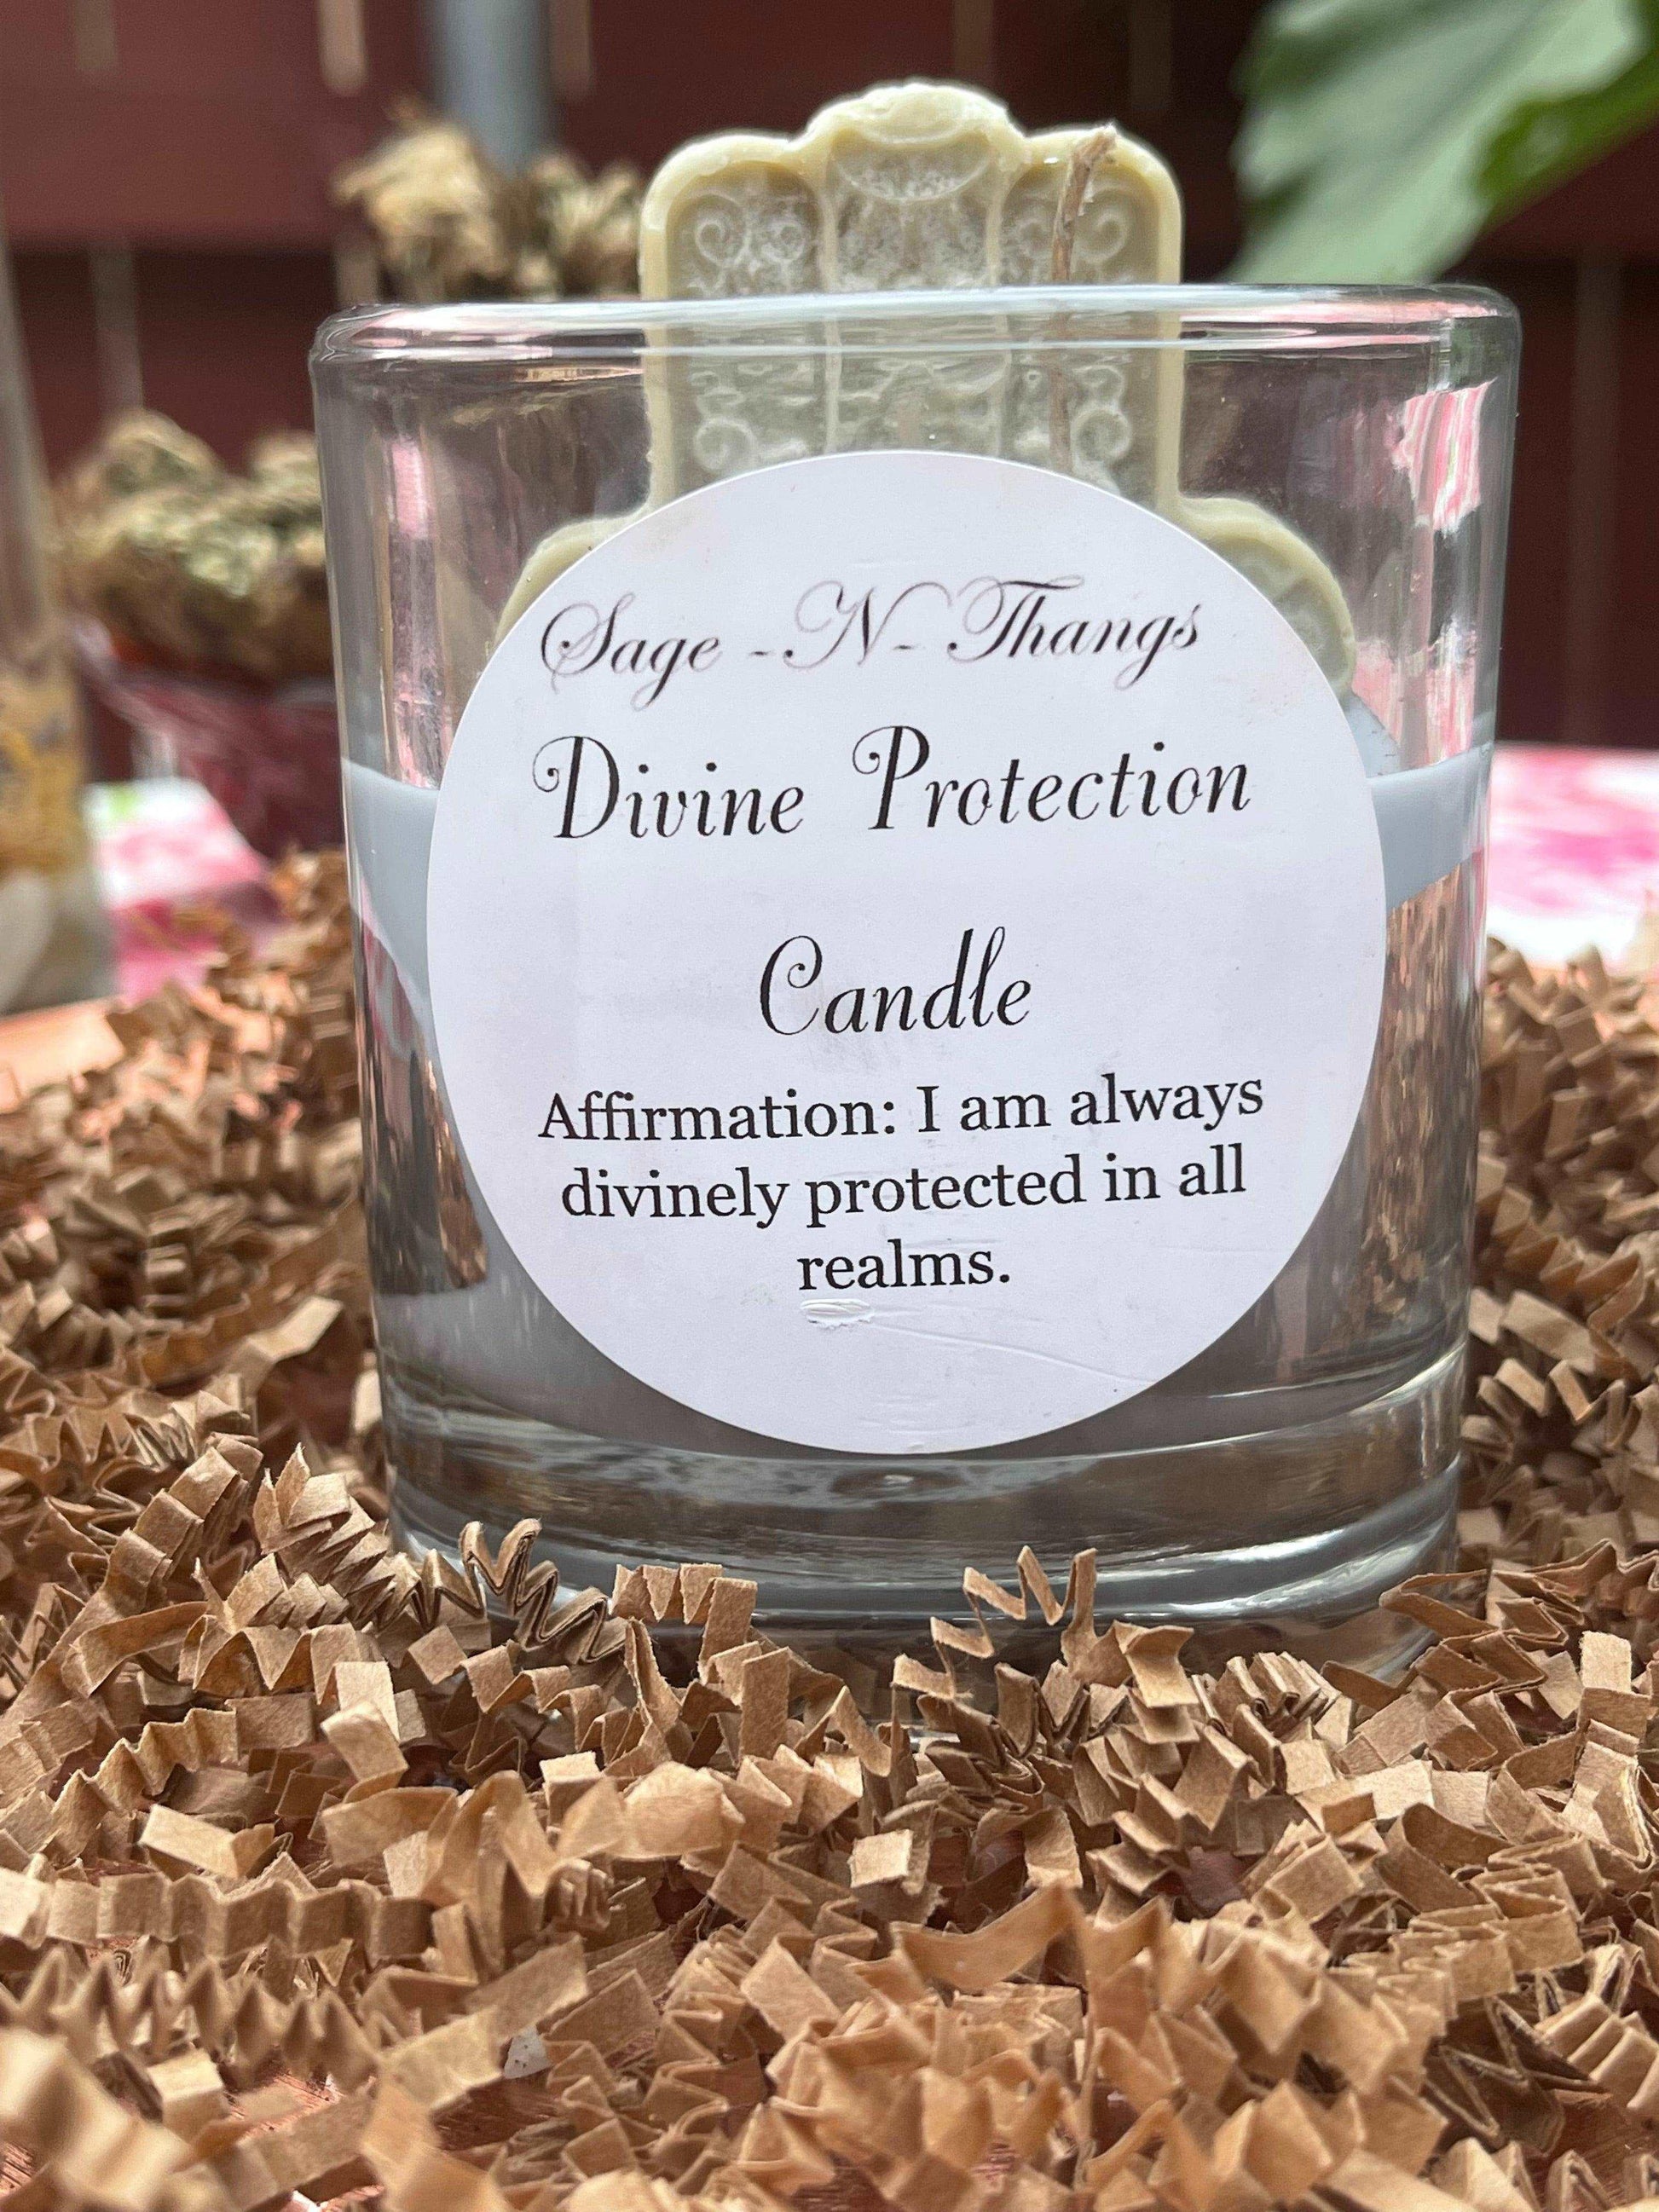 Divine Protection Candles by Sage N Thangs